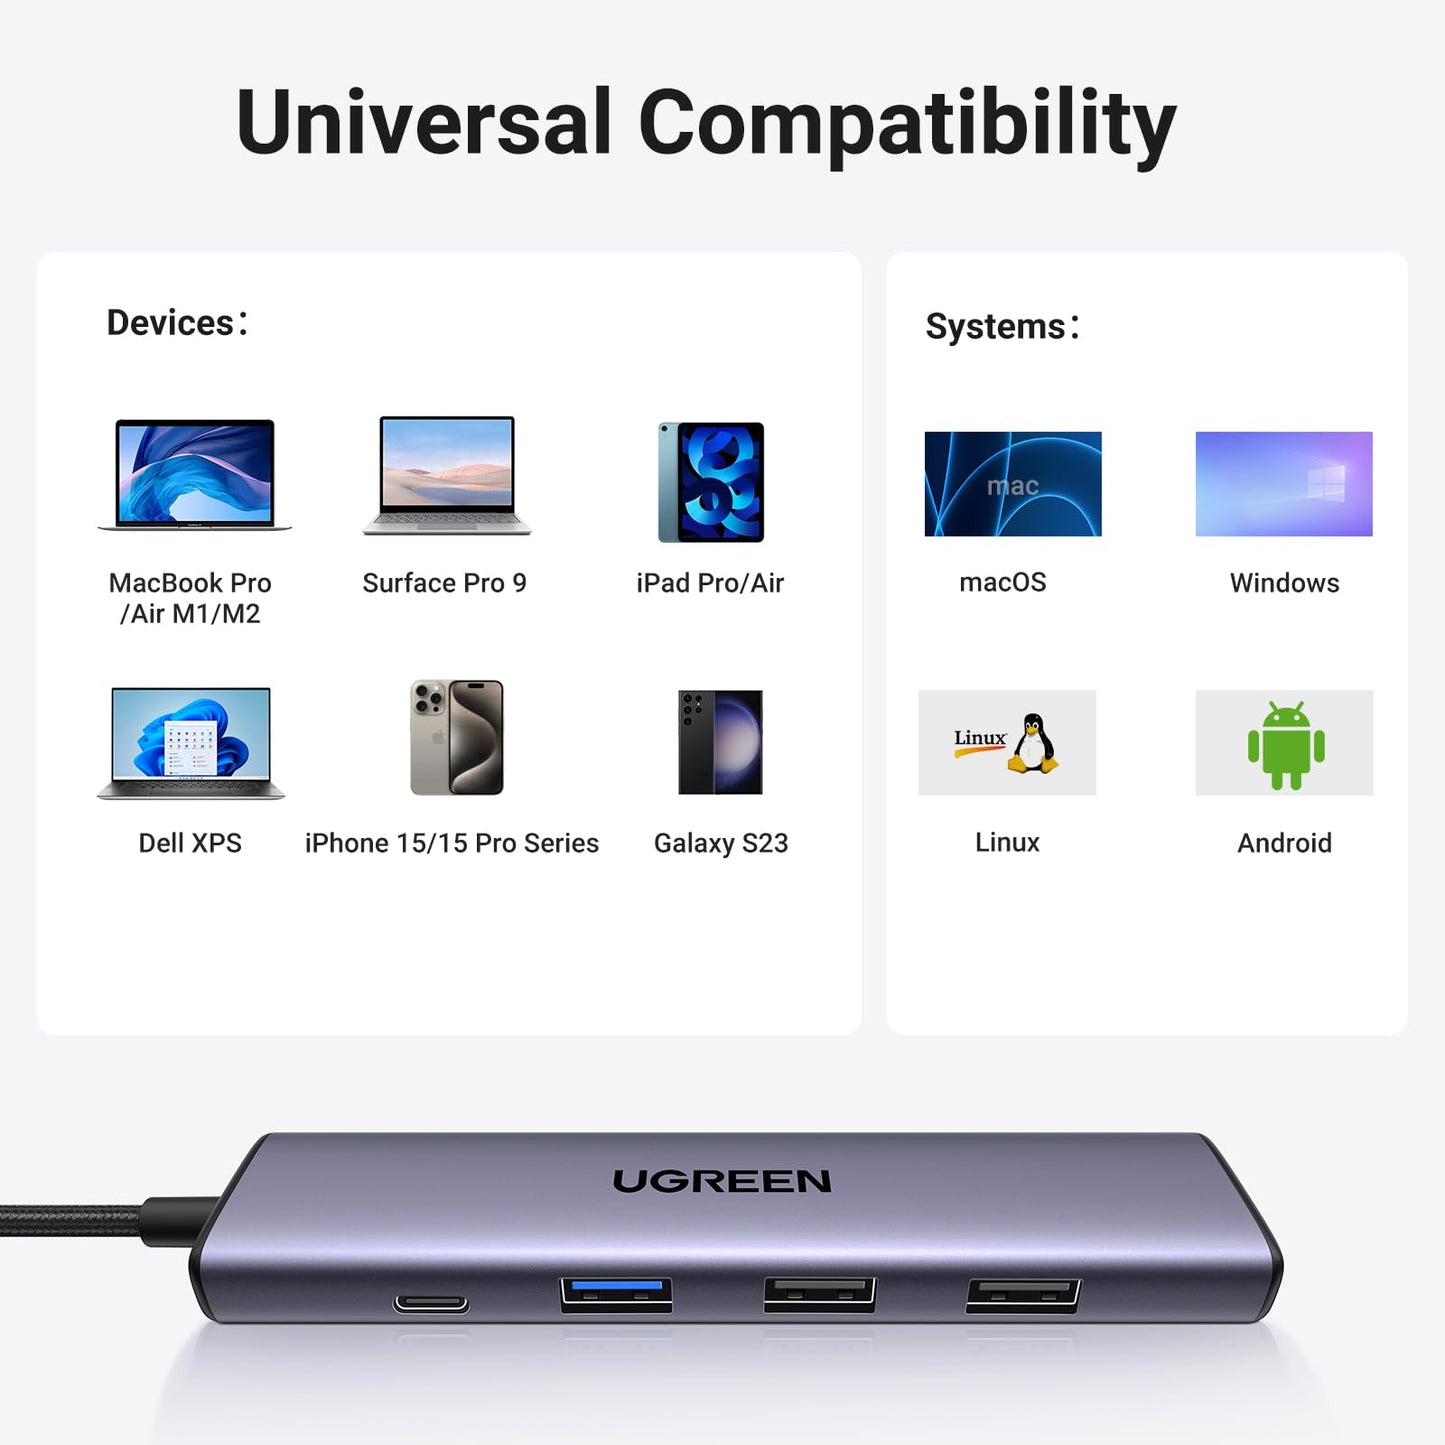 UGREEN Revodok 105 USB C Hub 5 in 1 Multiport Adapter 4K HDMI, 100W Power Delivery, 3 USB-A Data Ports, USB C Dongle for MacBook Pro/Air, iPad Pro, iMac, iPhone 15 Pro/Pro Max, XPS, Thinkpad